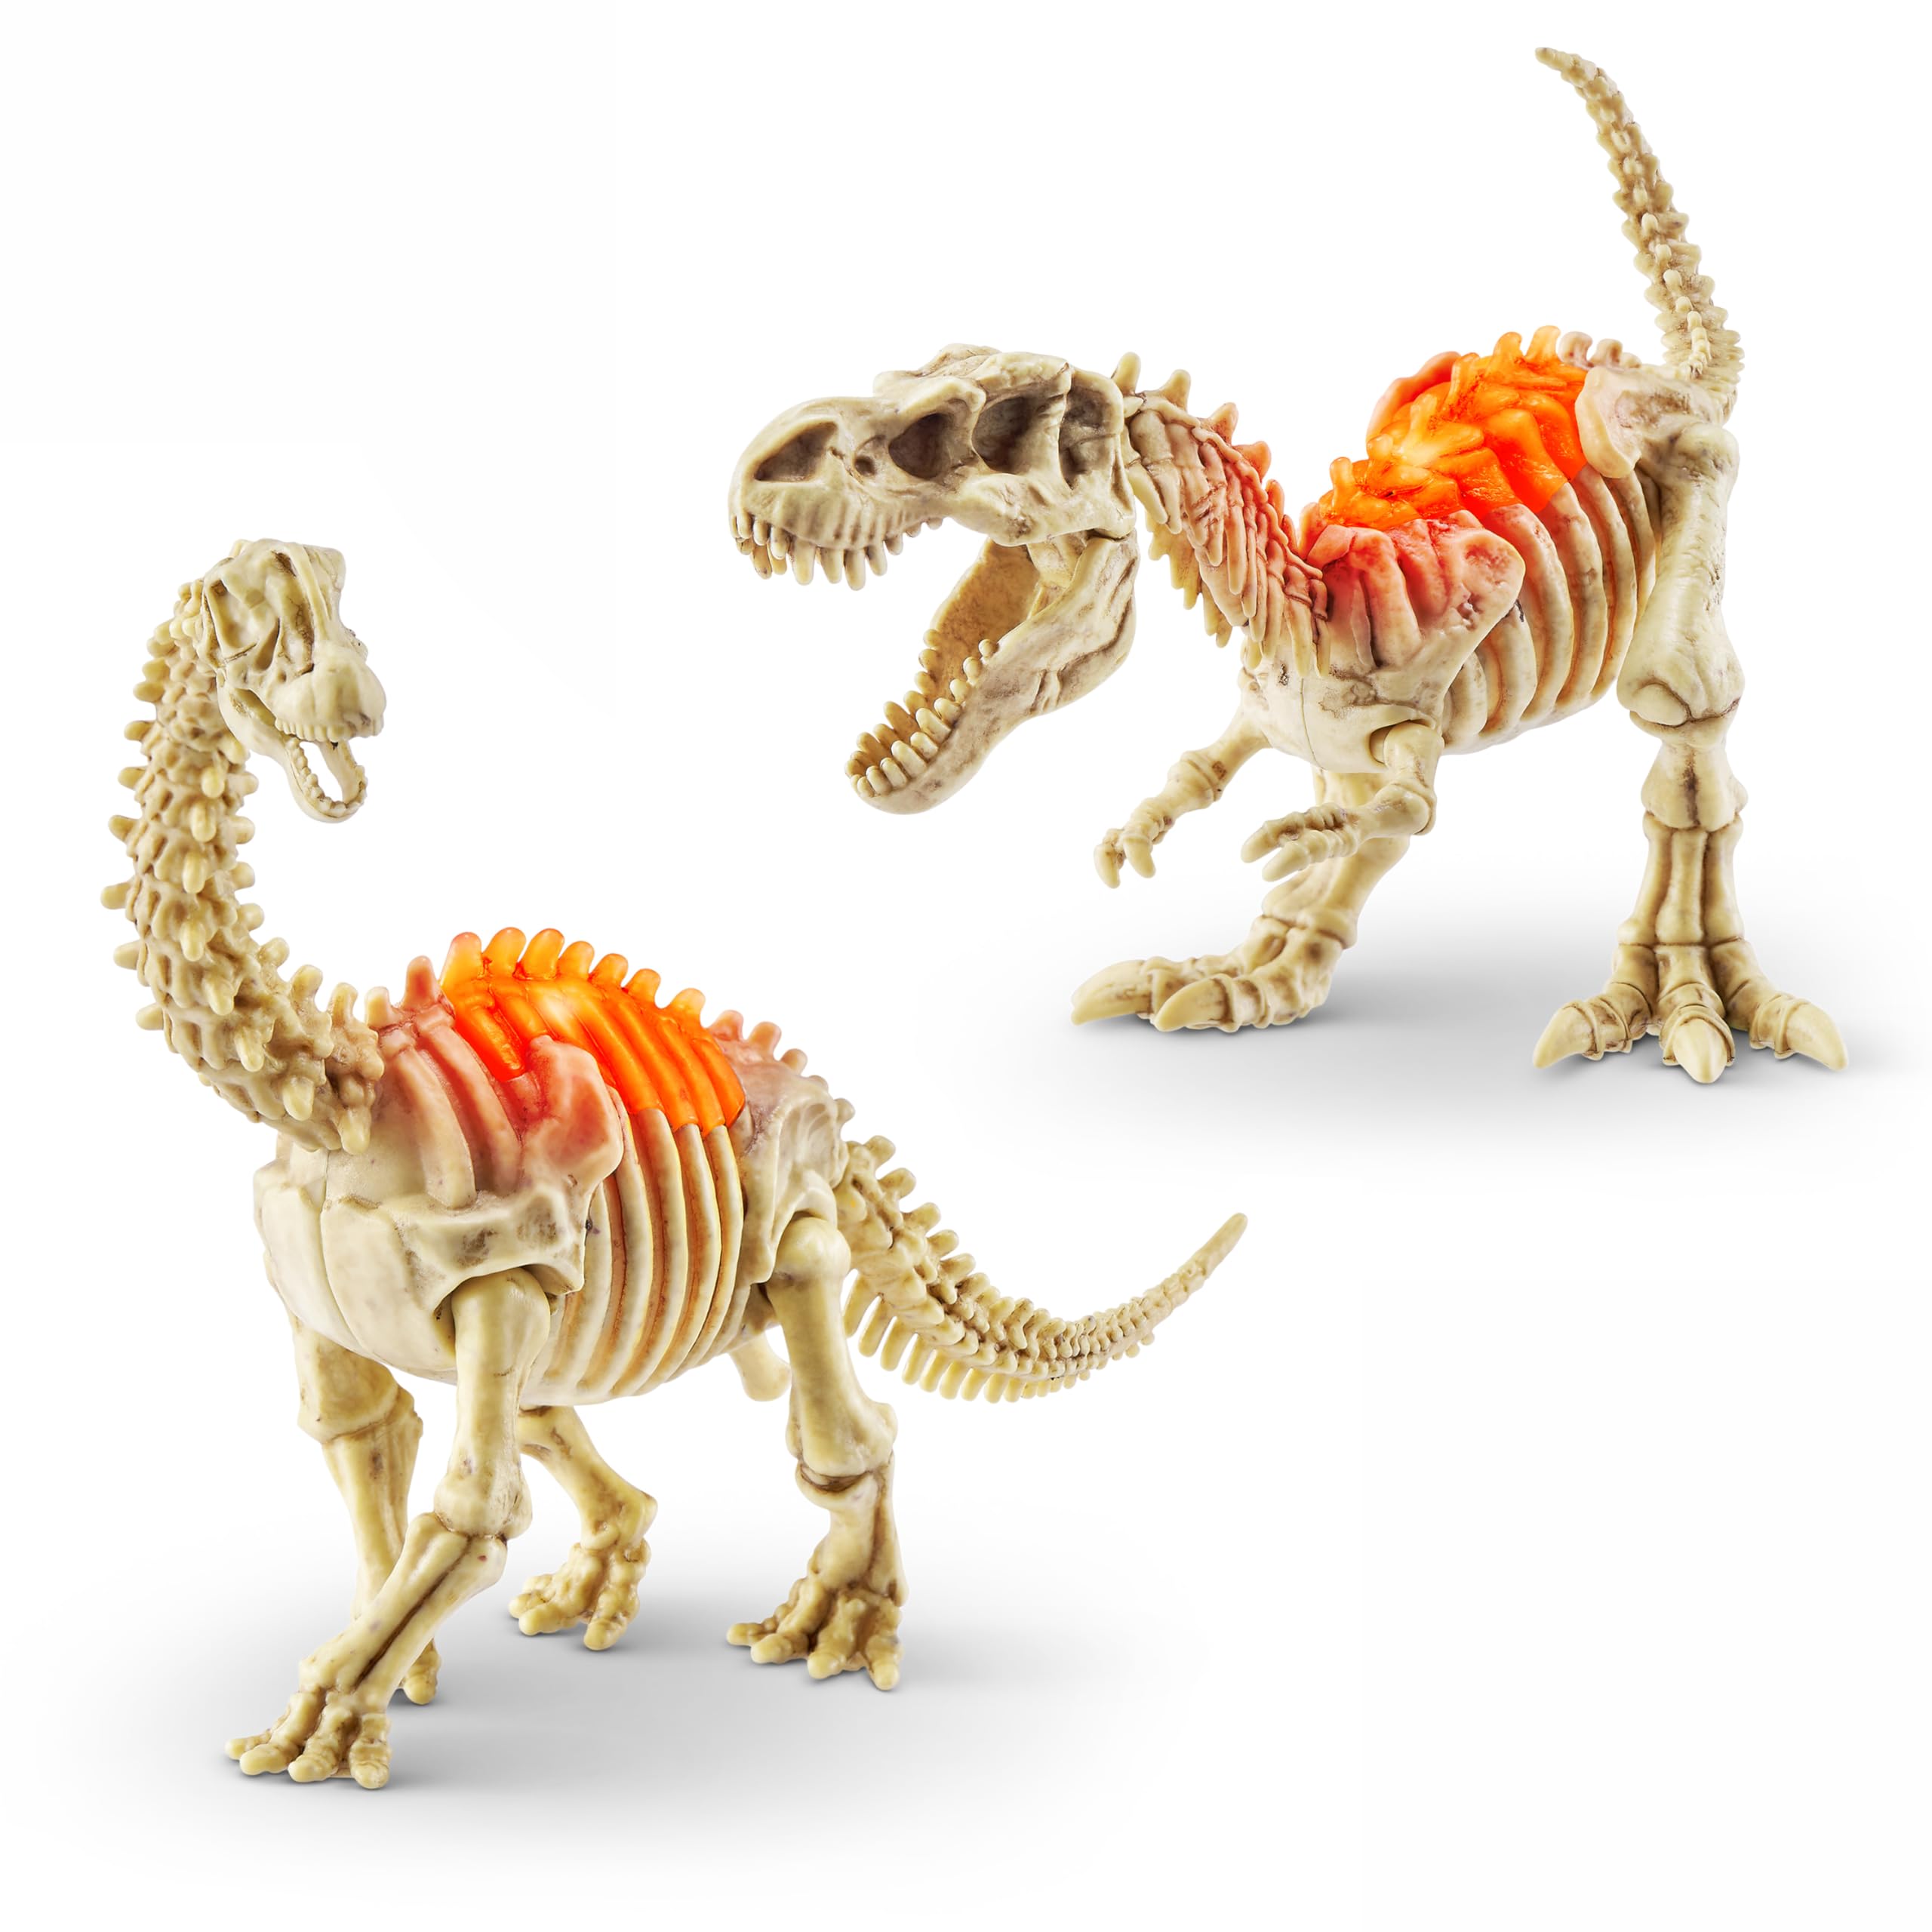 Robo Alive Mini Dino Fossil Find (2 Pack, T-Rex & Brontosaurus) by ZURU Boys 4-8 Dig and Discover, STEM, Excavate Prehistoric Fossils, Educational Toys, Great Science Kit Gift for Girls and Boy